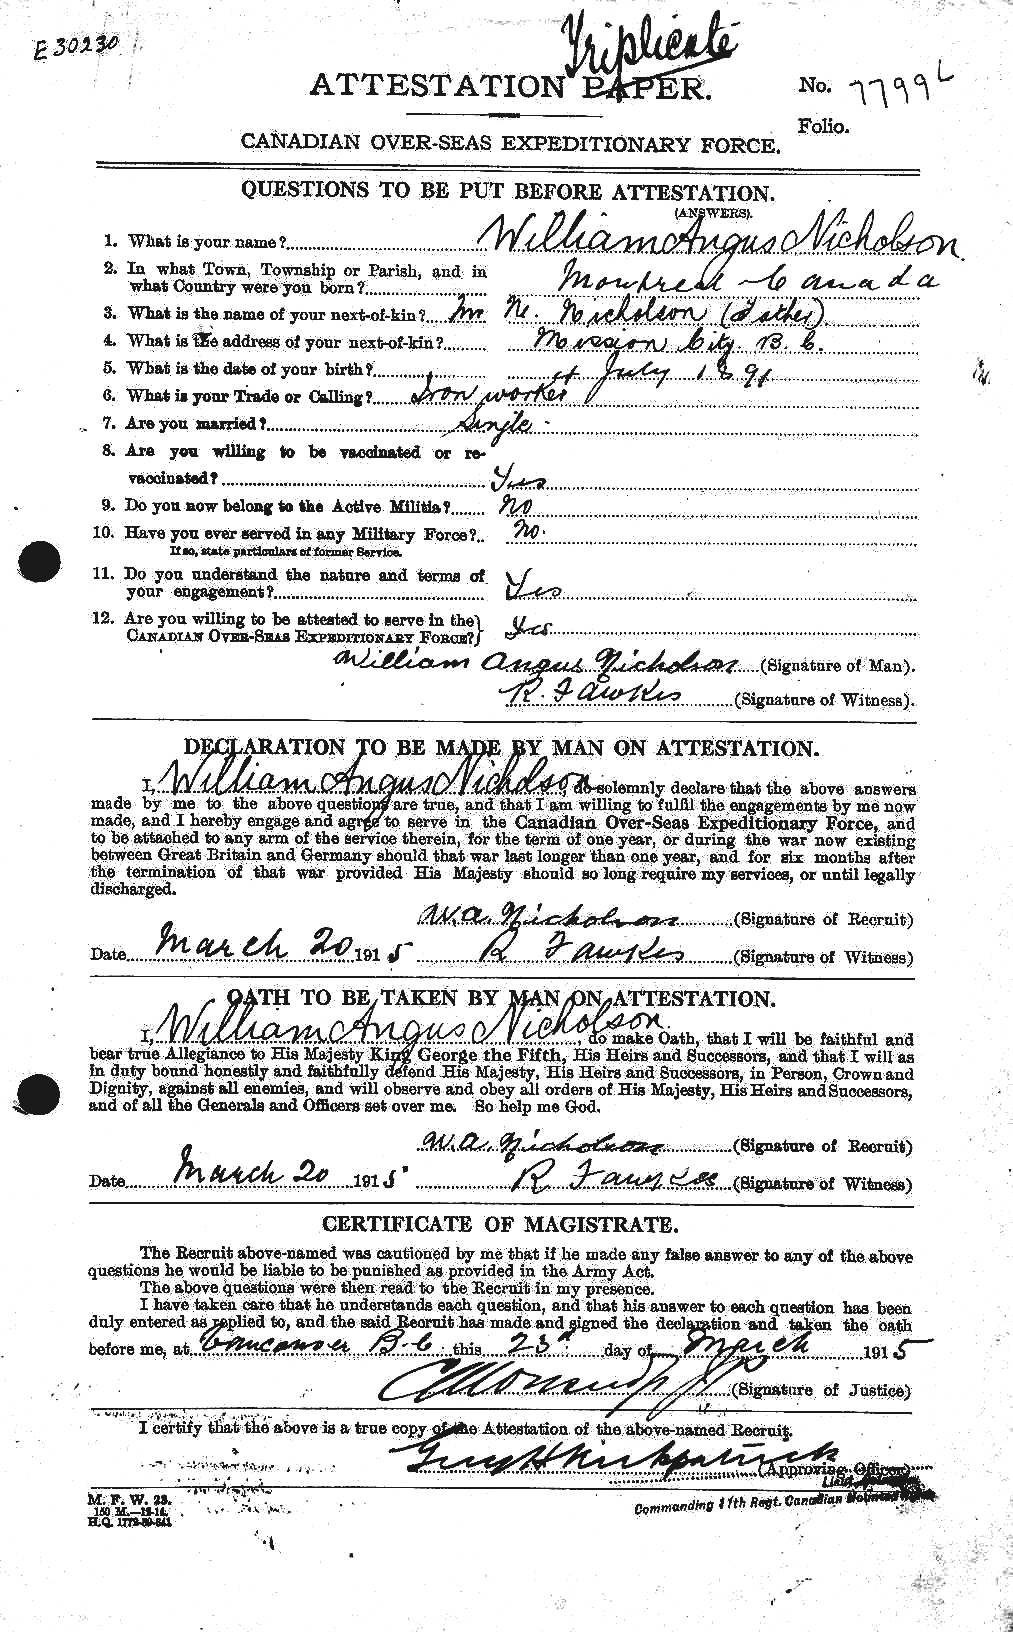 Personnel Records of the First World War - CEF 556489a